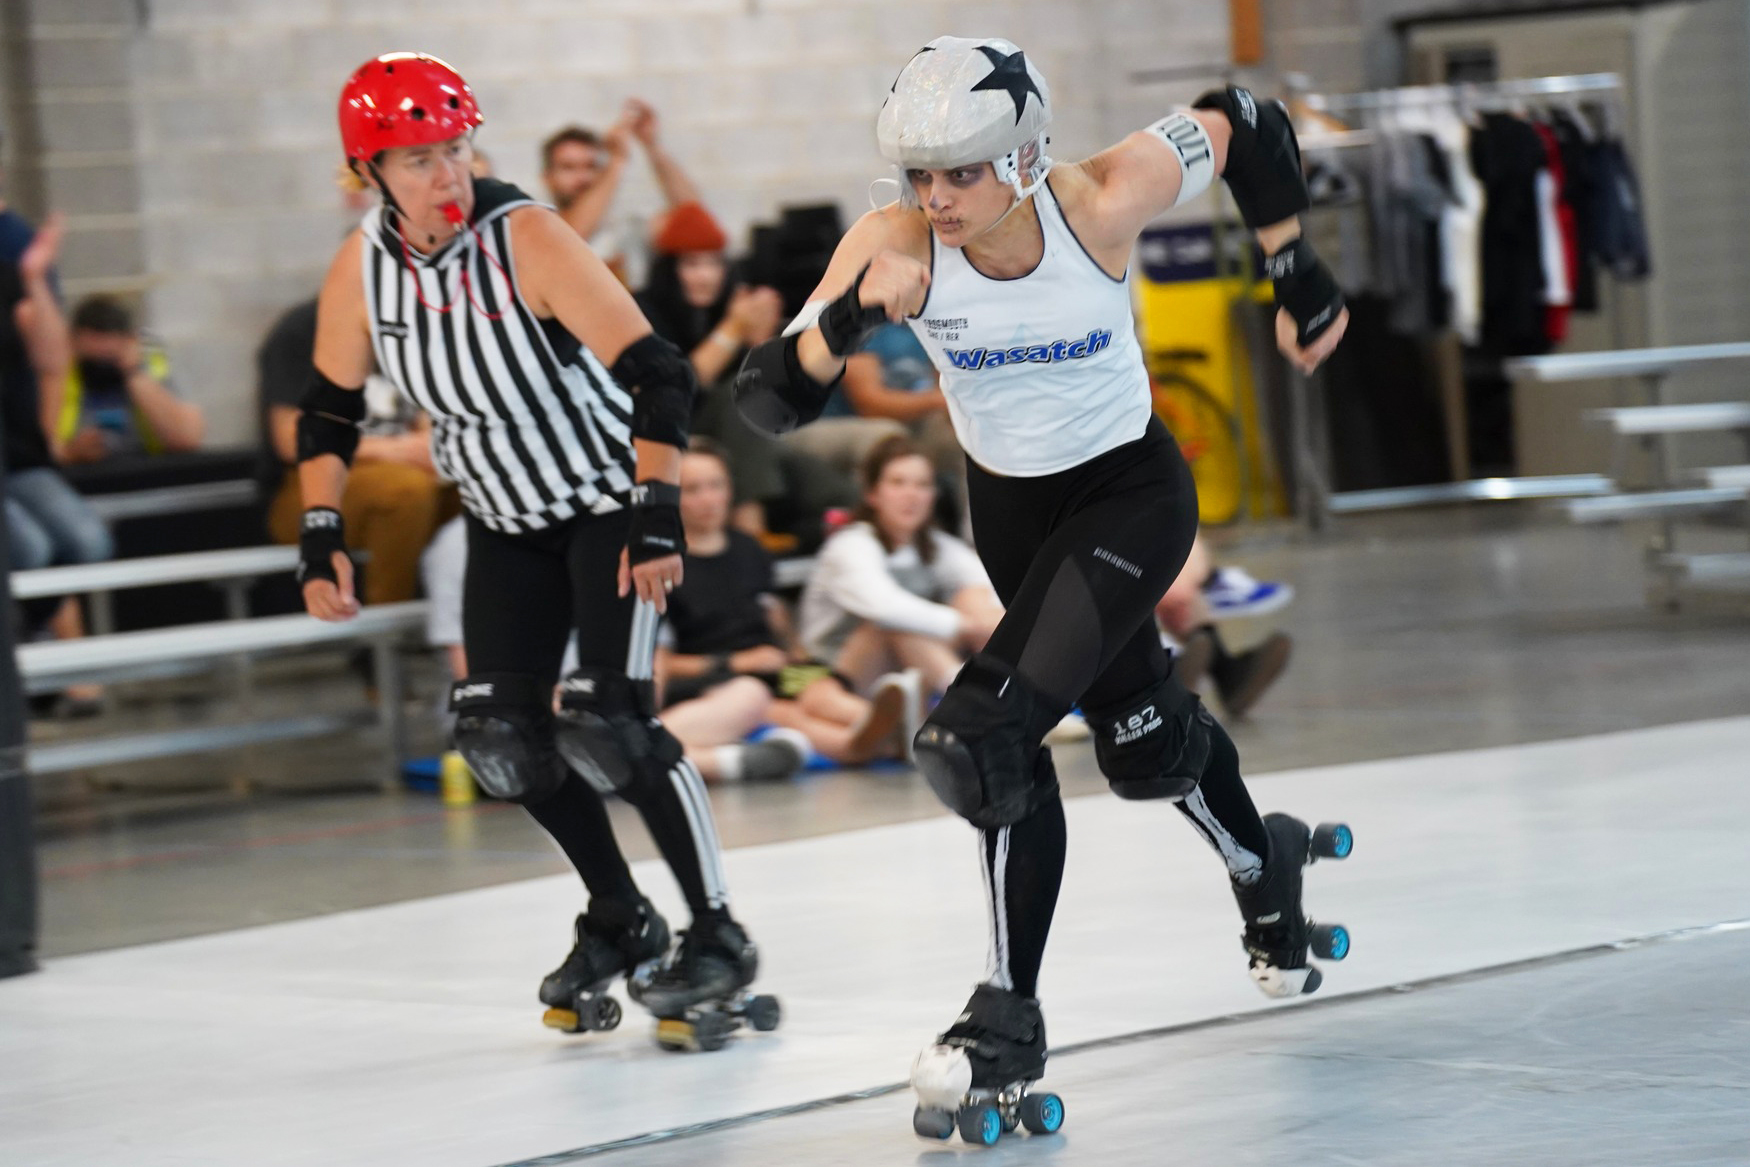 WRD skater Skelly Tore Us jams during a travel team bout against Pikes Peak.